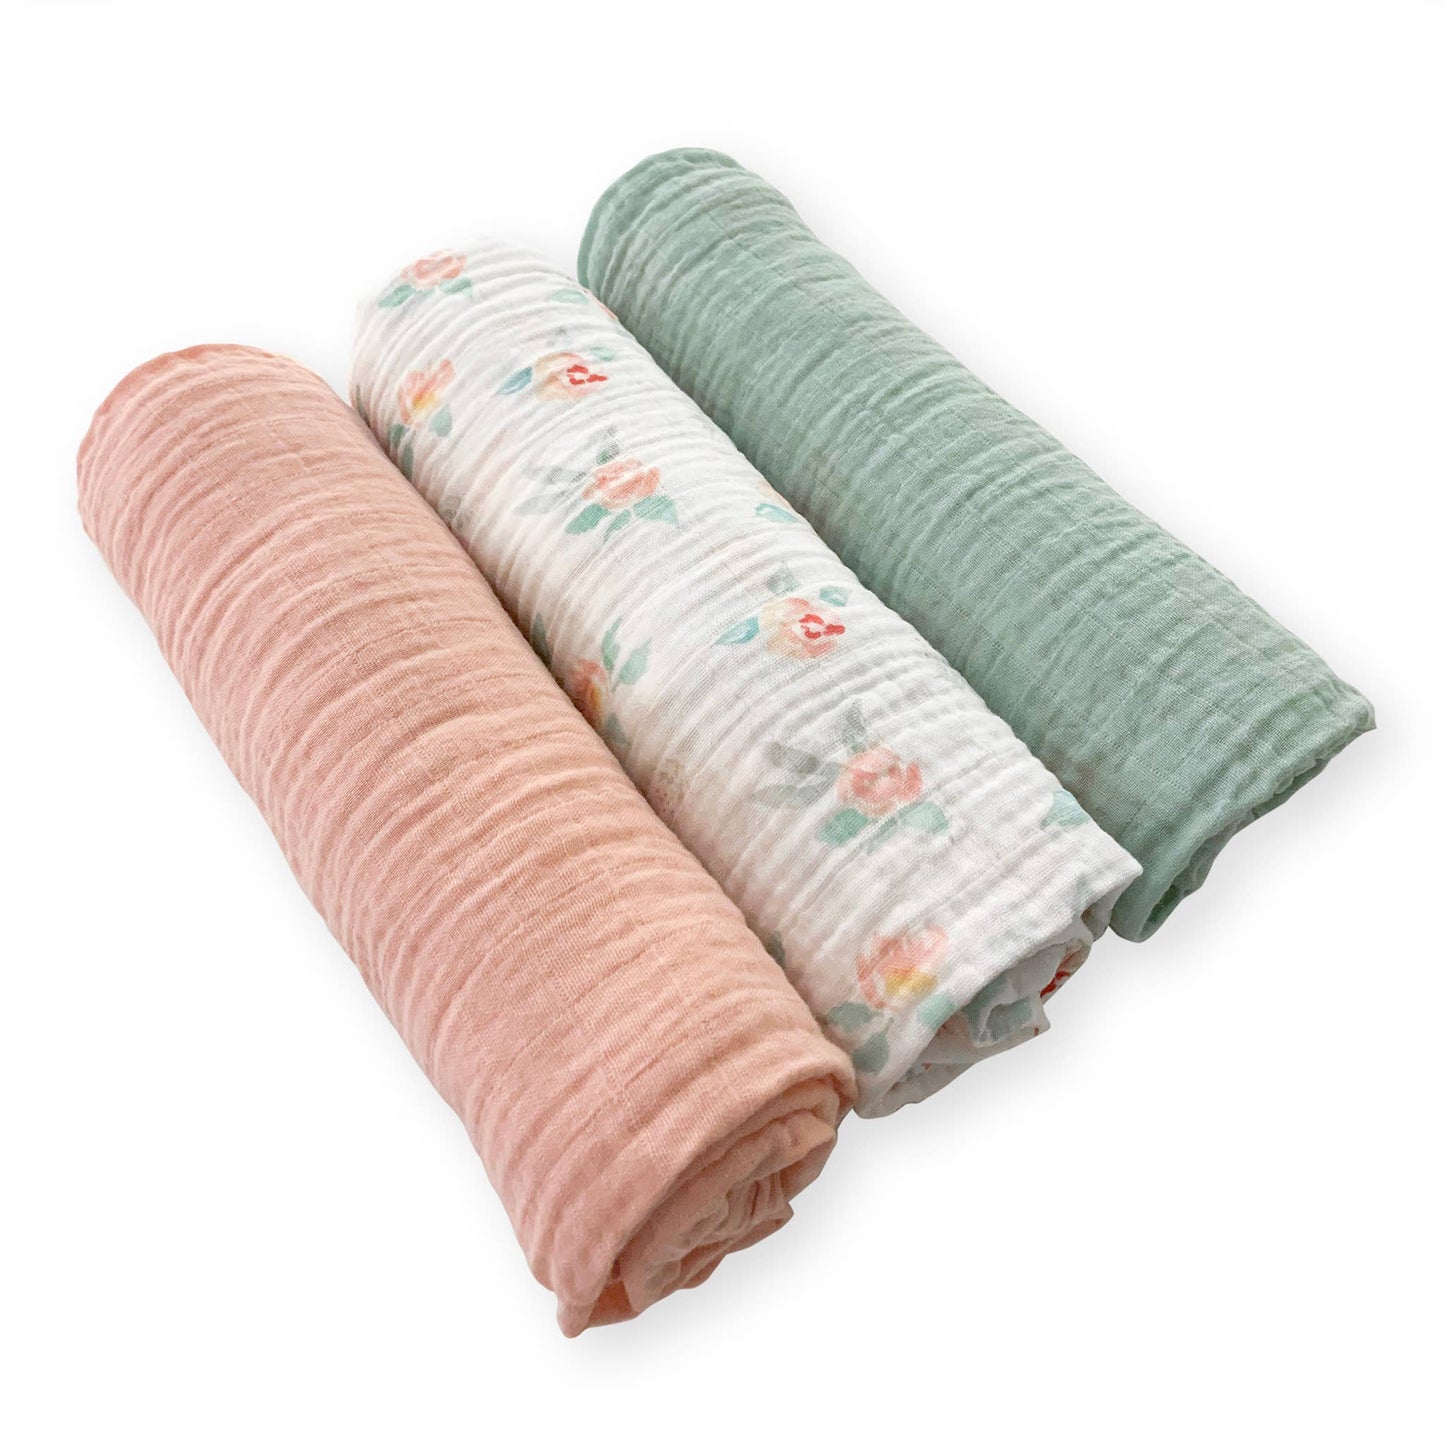 FLORAL WATERCOLOR MUSLIN SWADDLES - SET OF 3